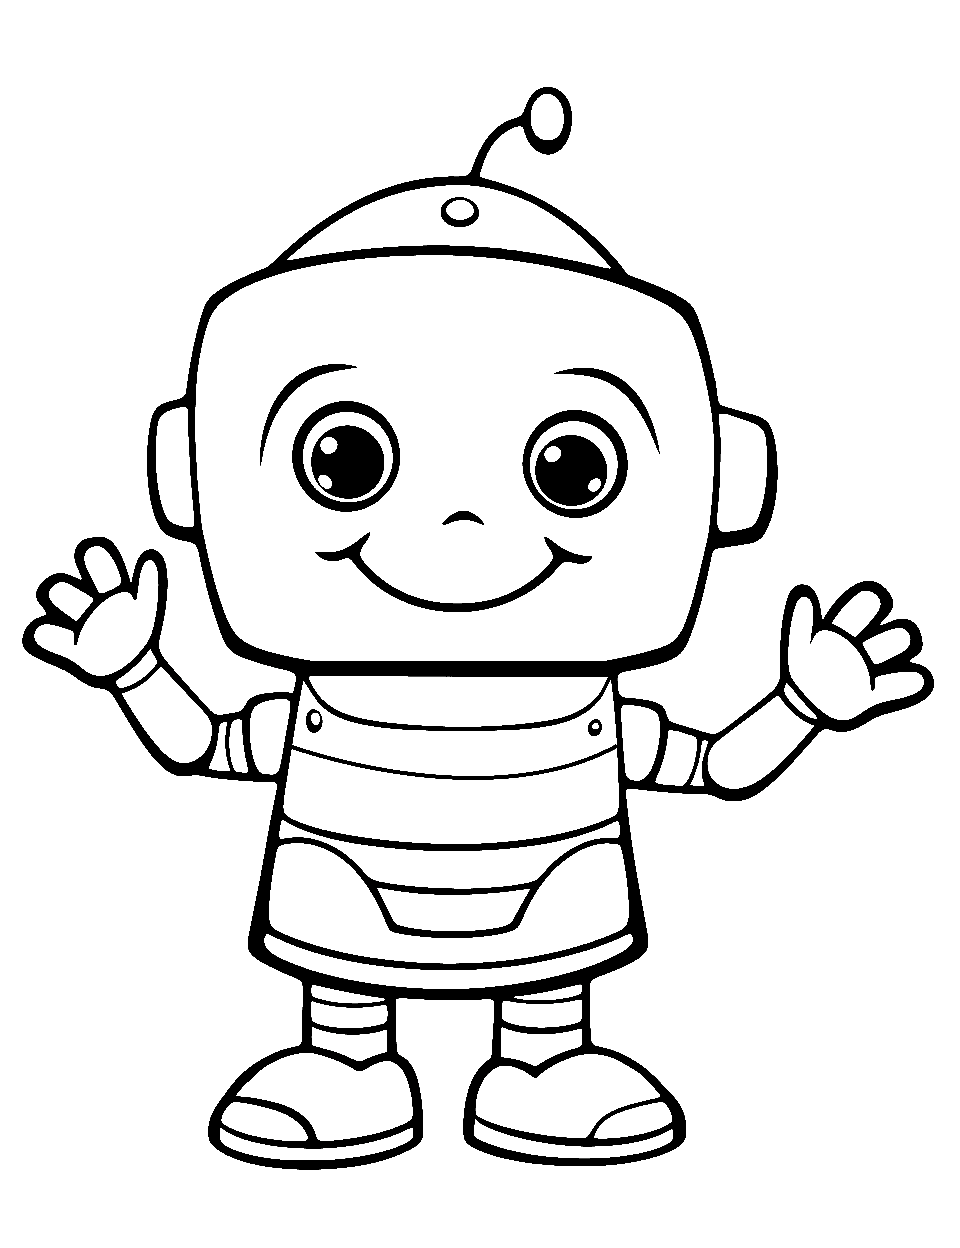 Friendly Robot Coloring Page - A friendly robot waving hello.